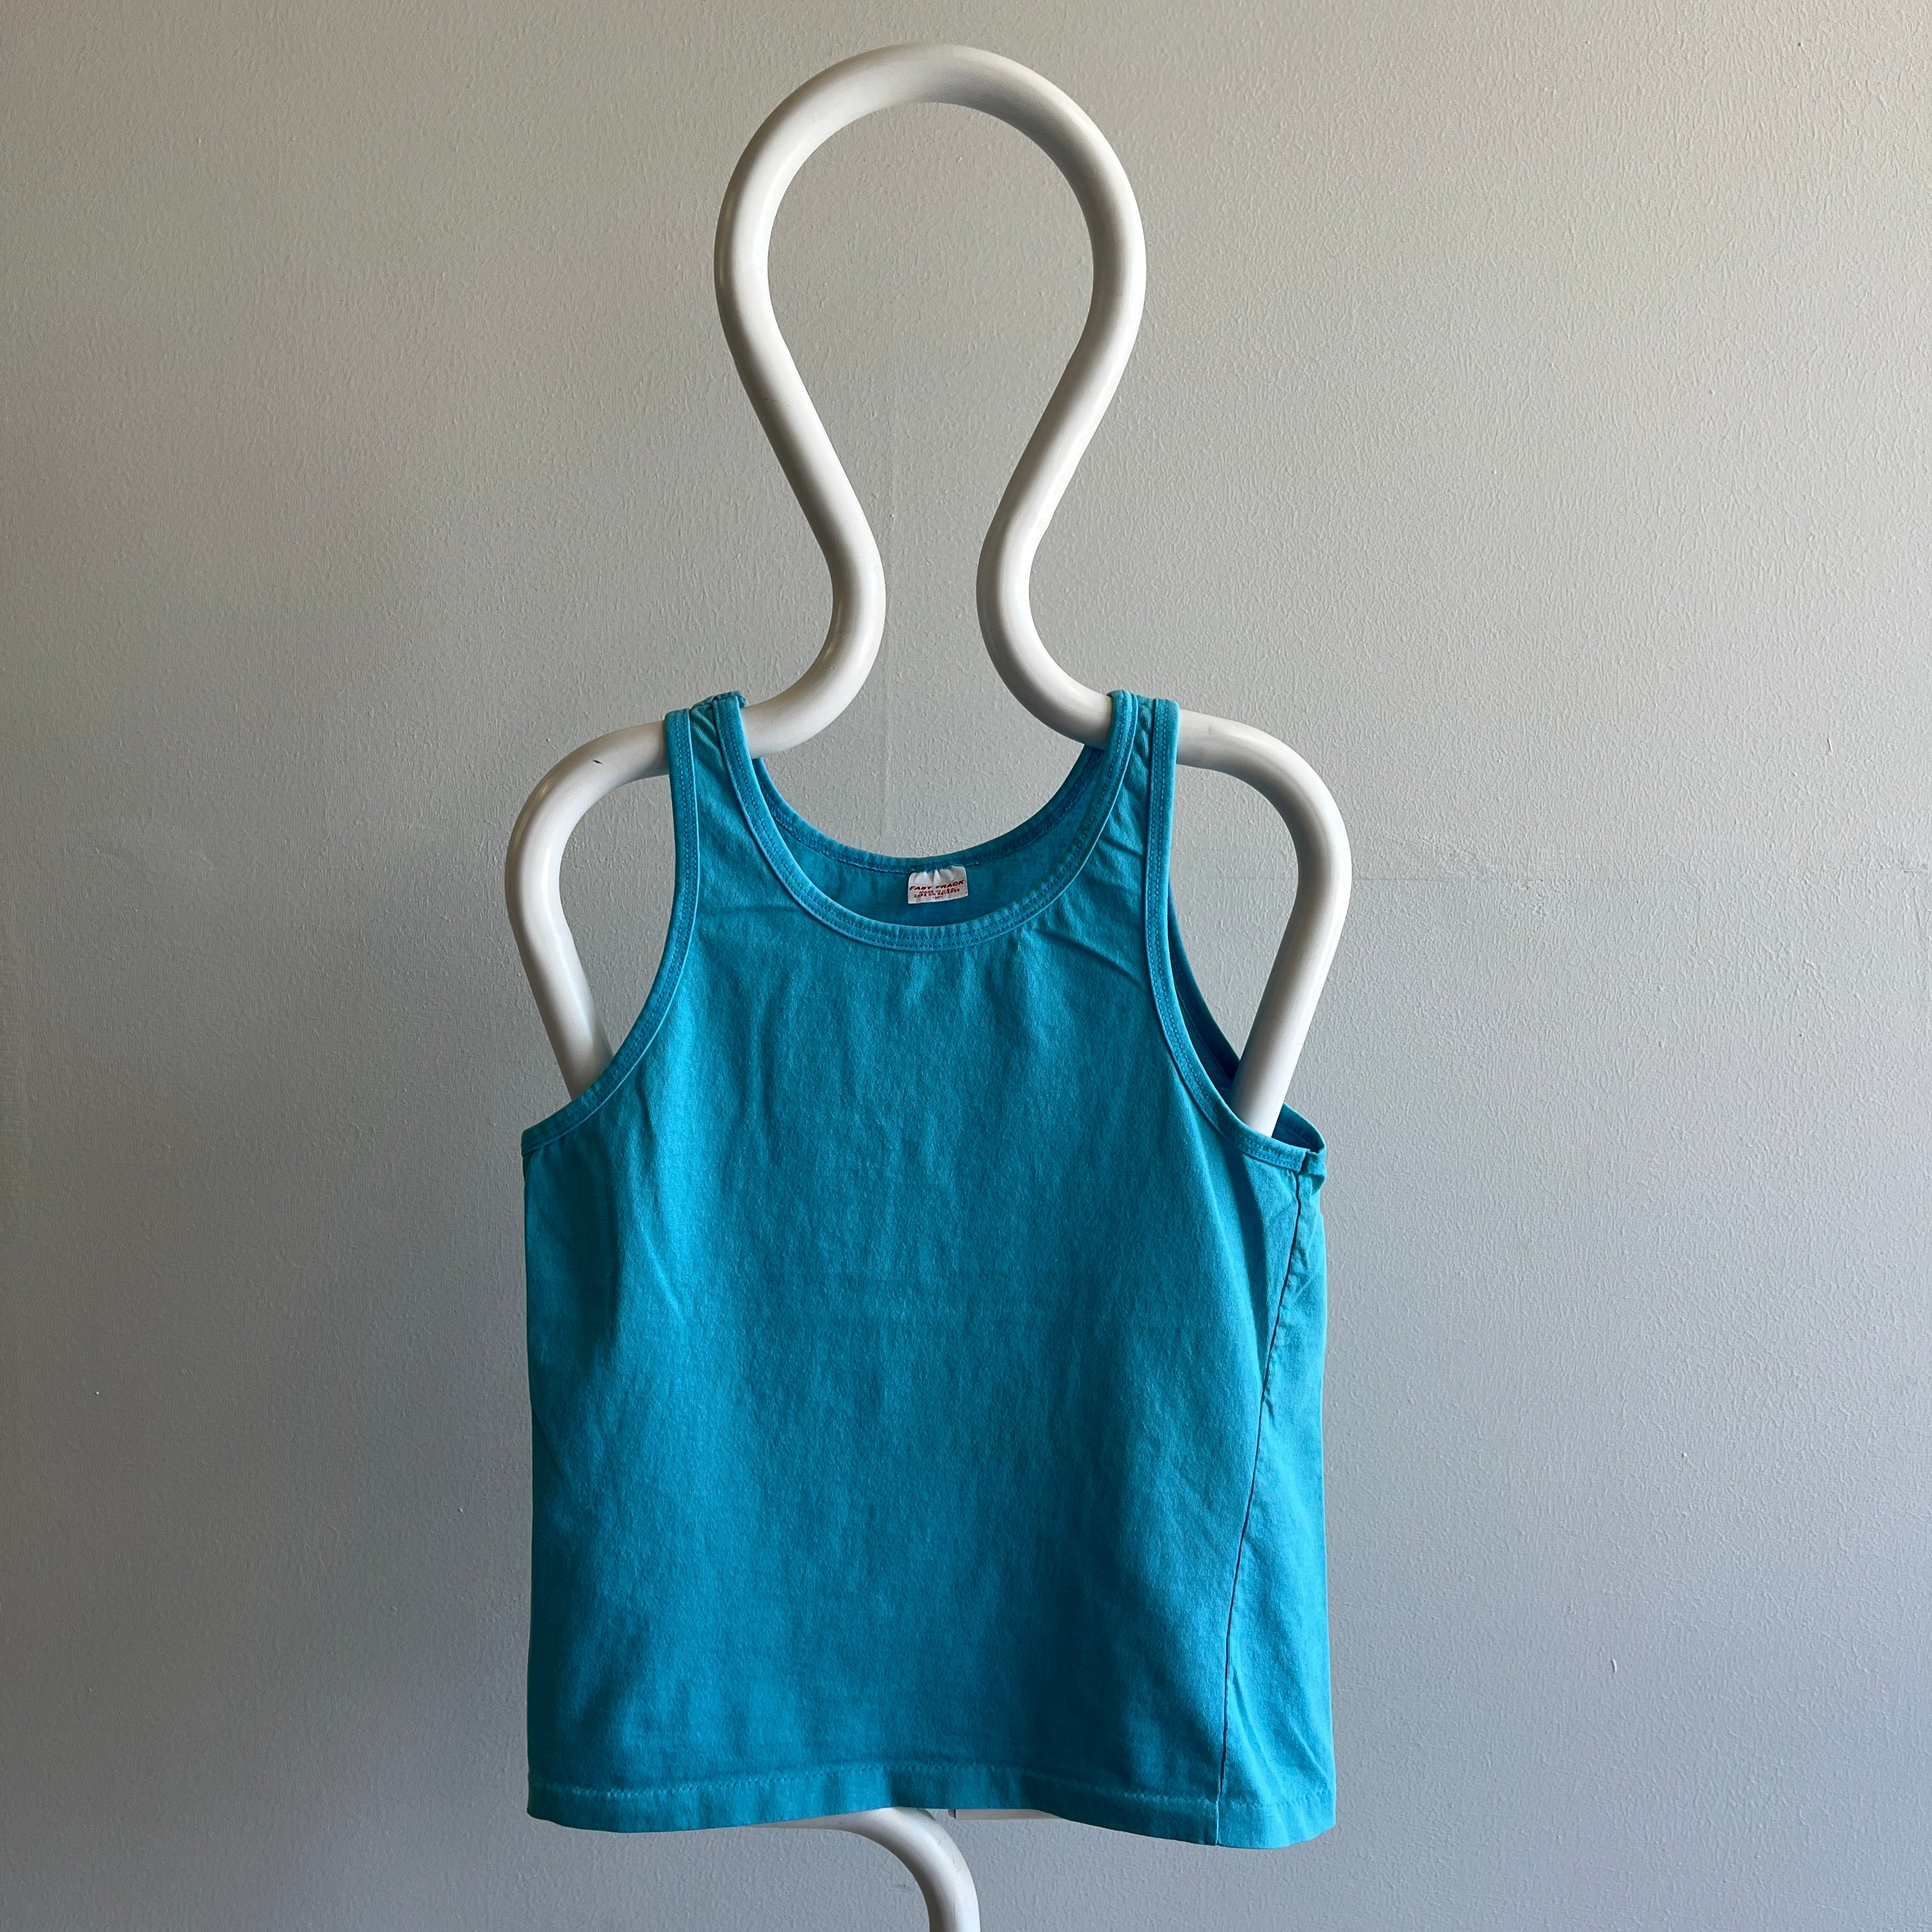 1980s Teal Blue Smaller Sized Tank Top by Fast Track